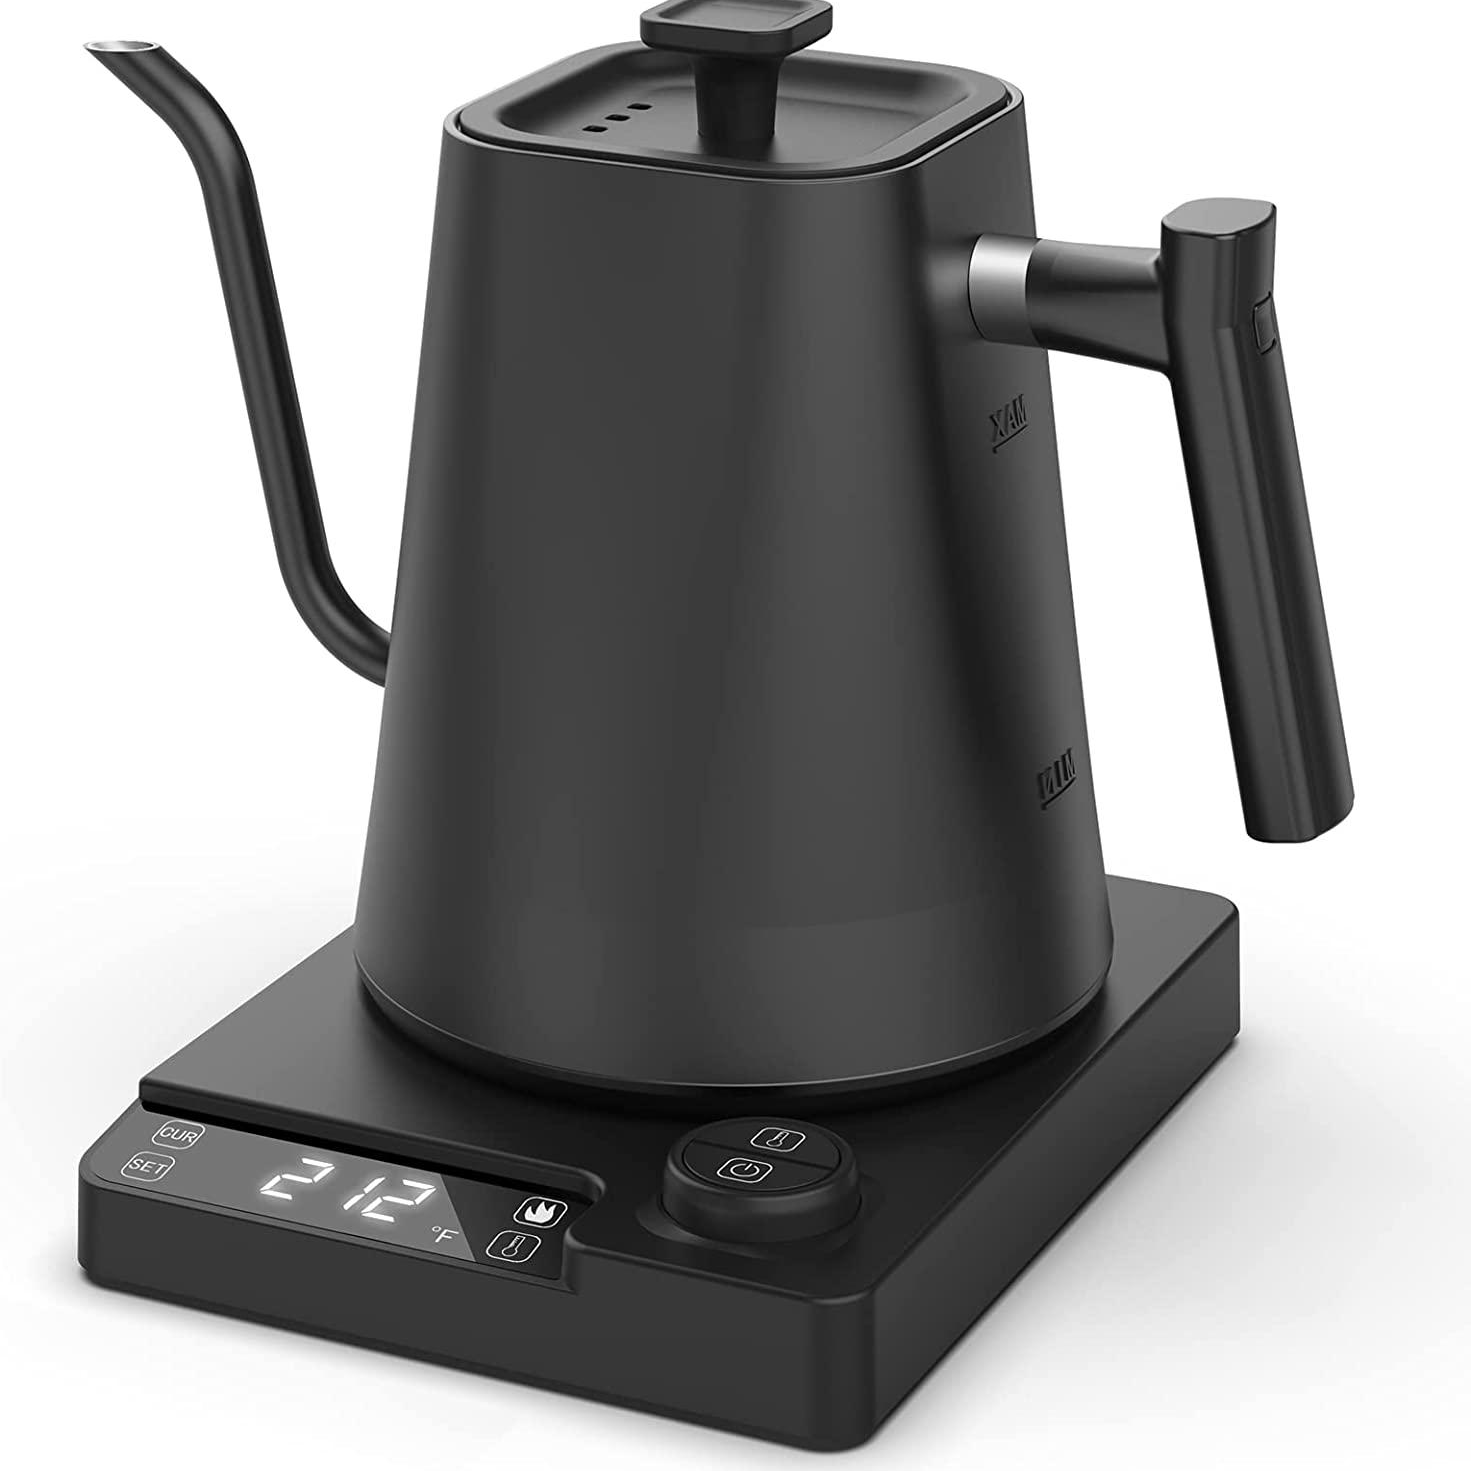 1pc Electric Gooseneck Kettle, 33.81oz Electric Kettle With Display,  Automatic Shut Off, Coffee Kettle Temperature Control Hot Water Boiler,  Quick Hea